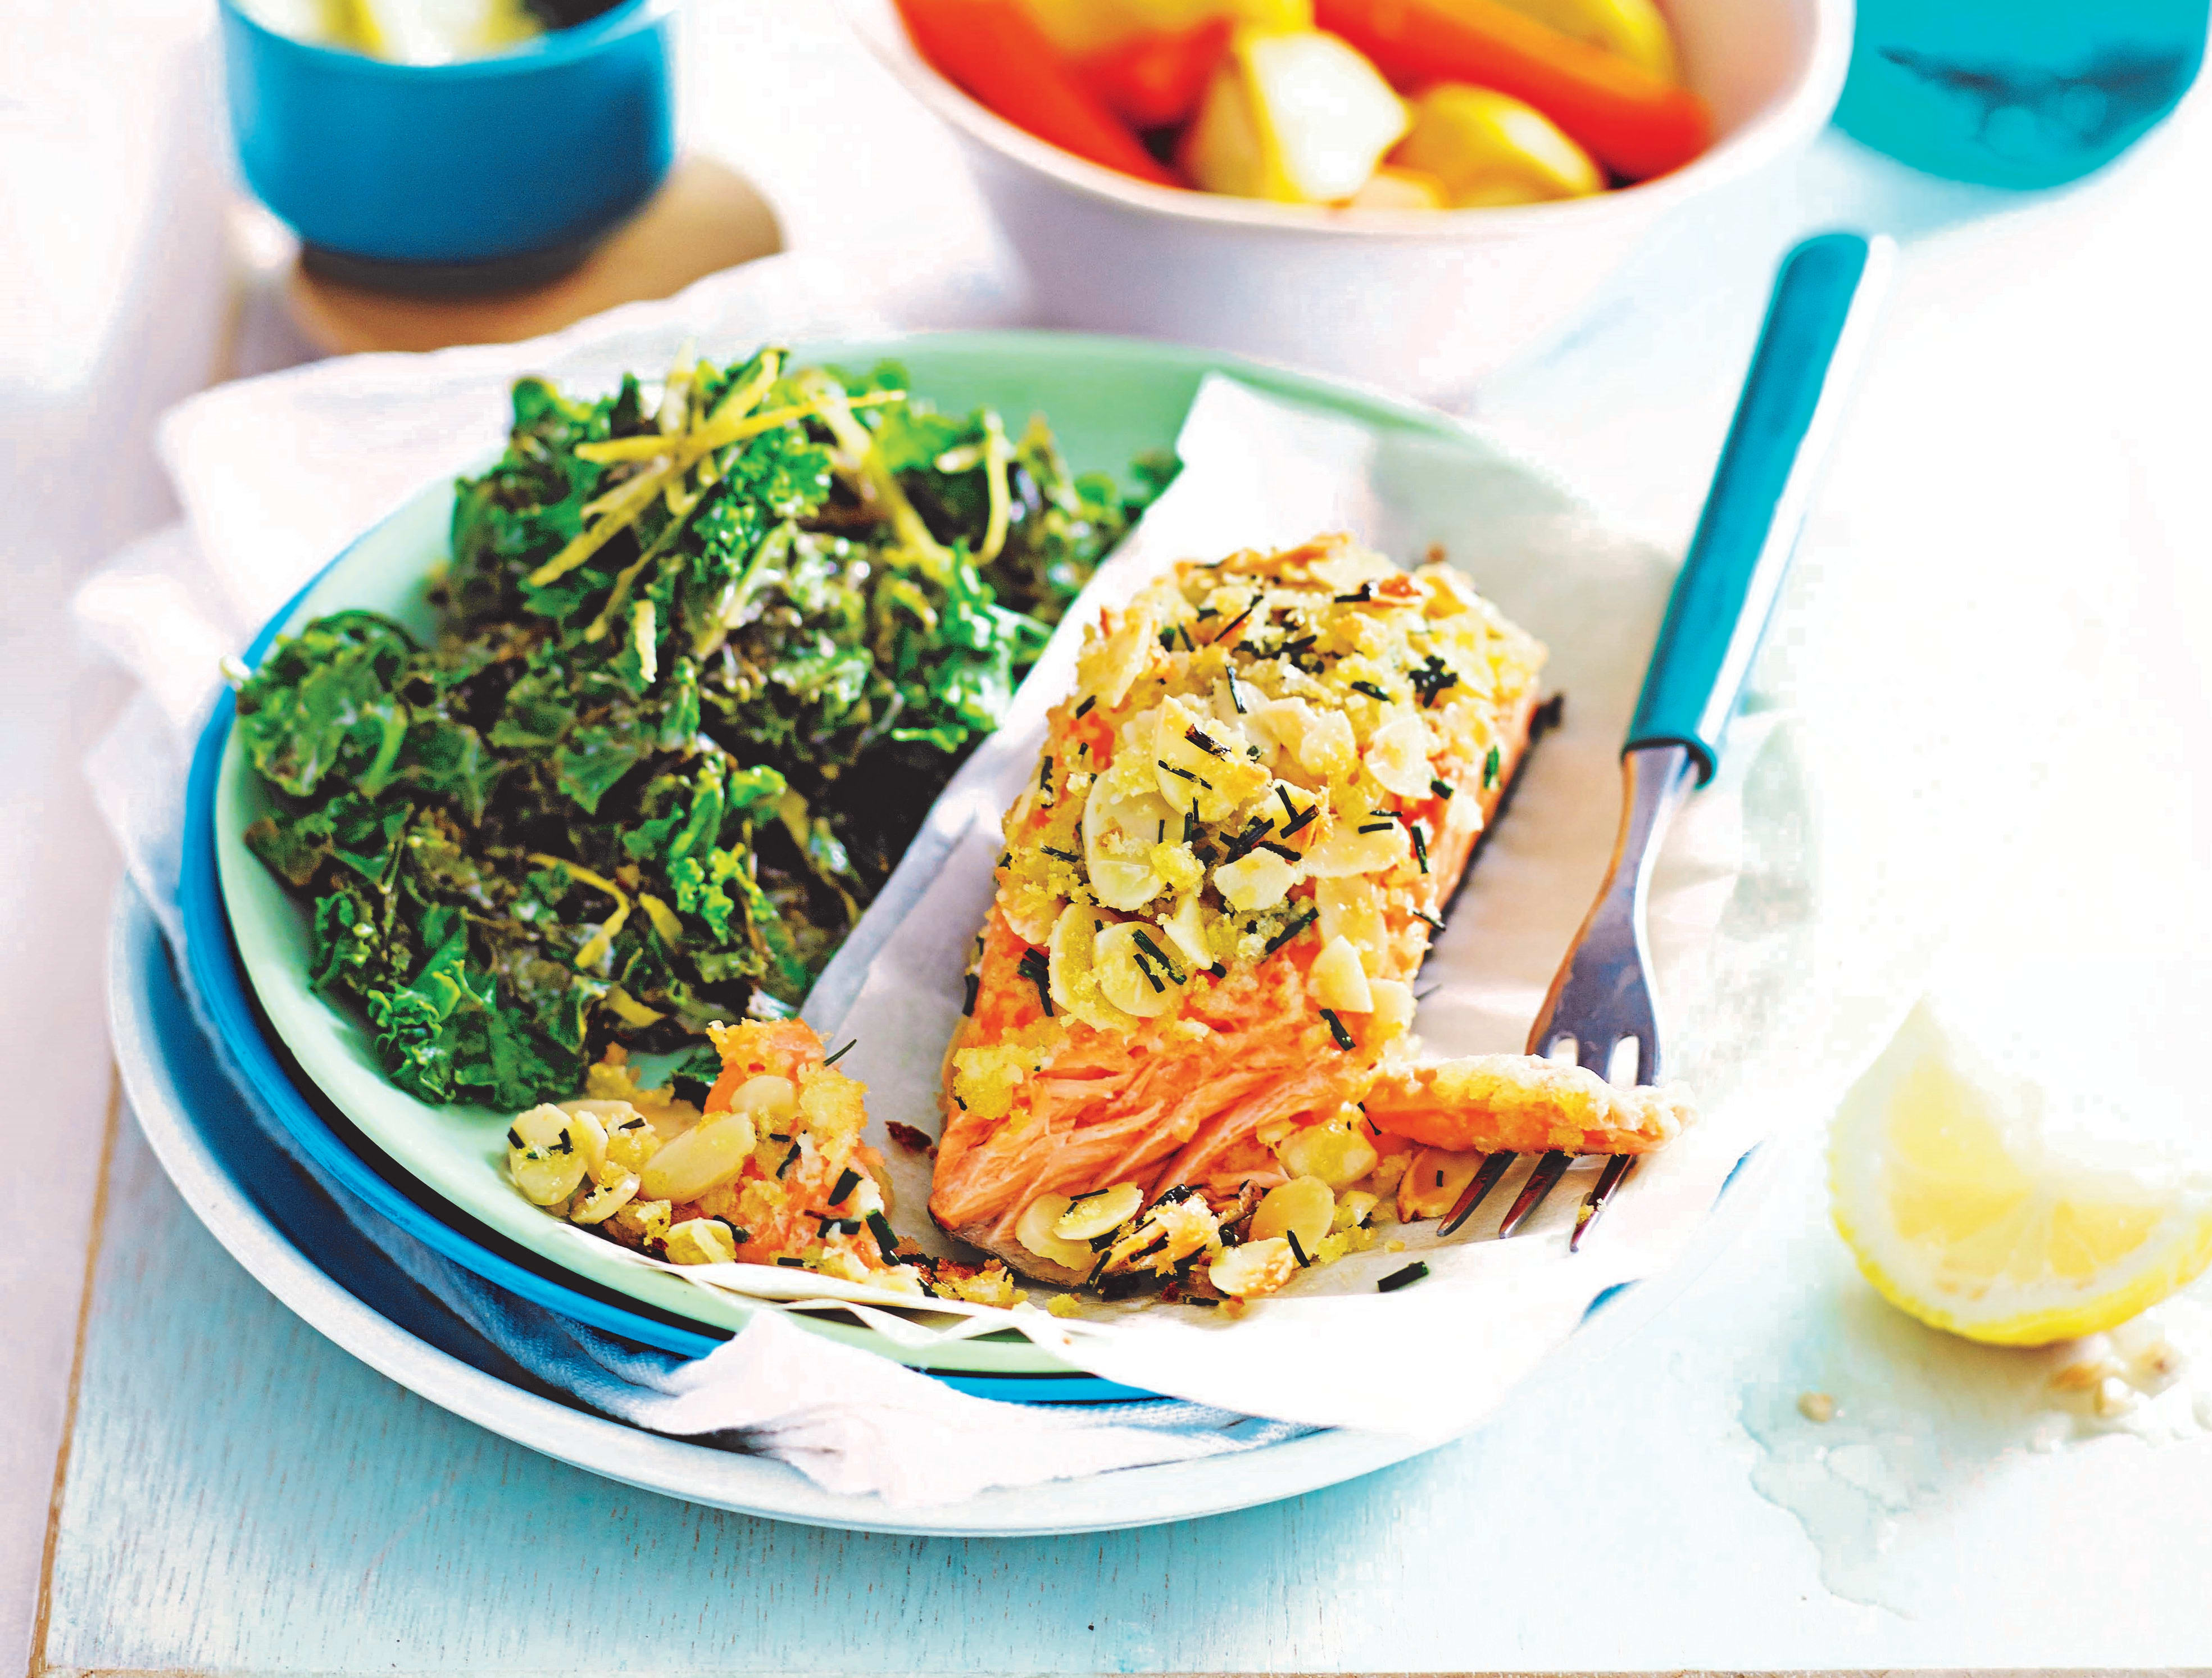 Photo of Almond-crusted salmon with lemon kale by WW